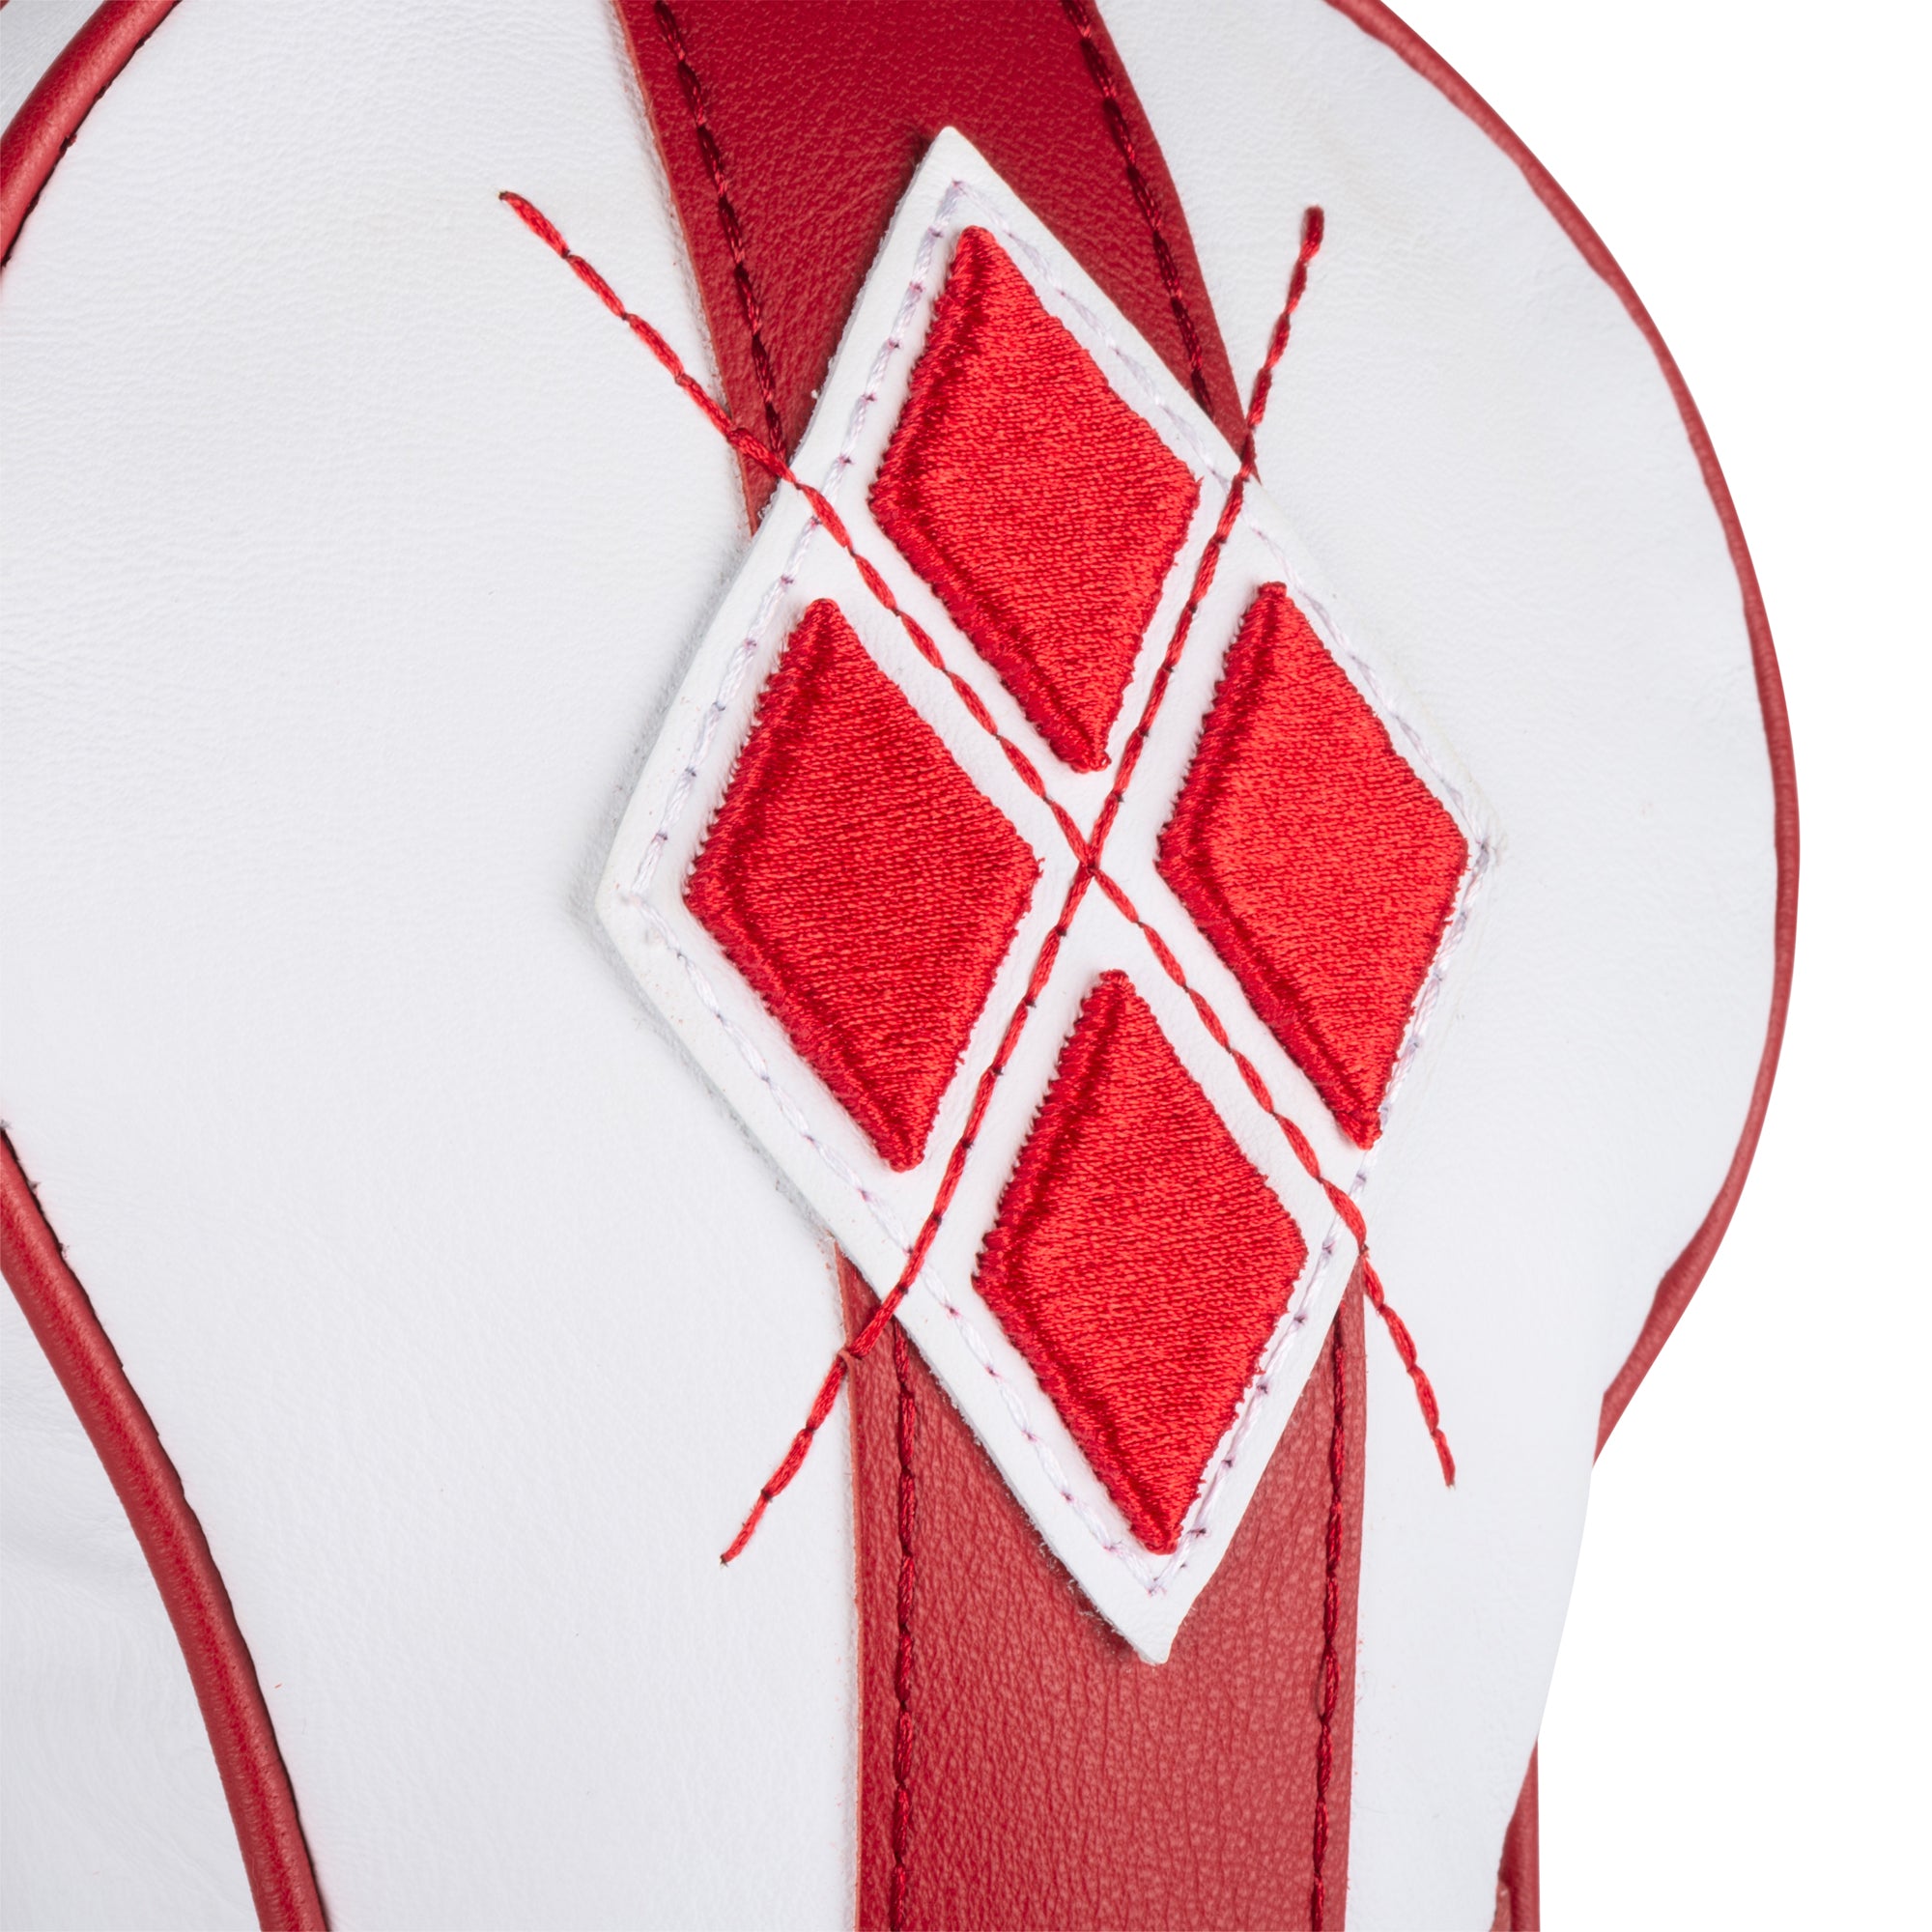 'England' Leather Fairway Headcover  - Limited Edition